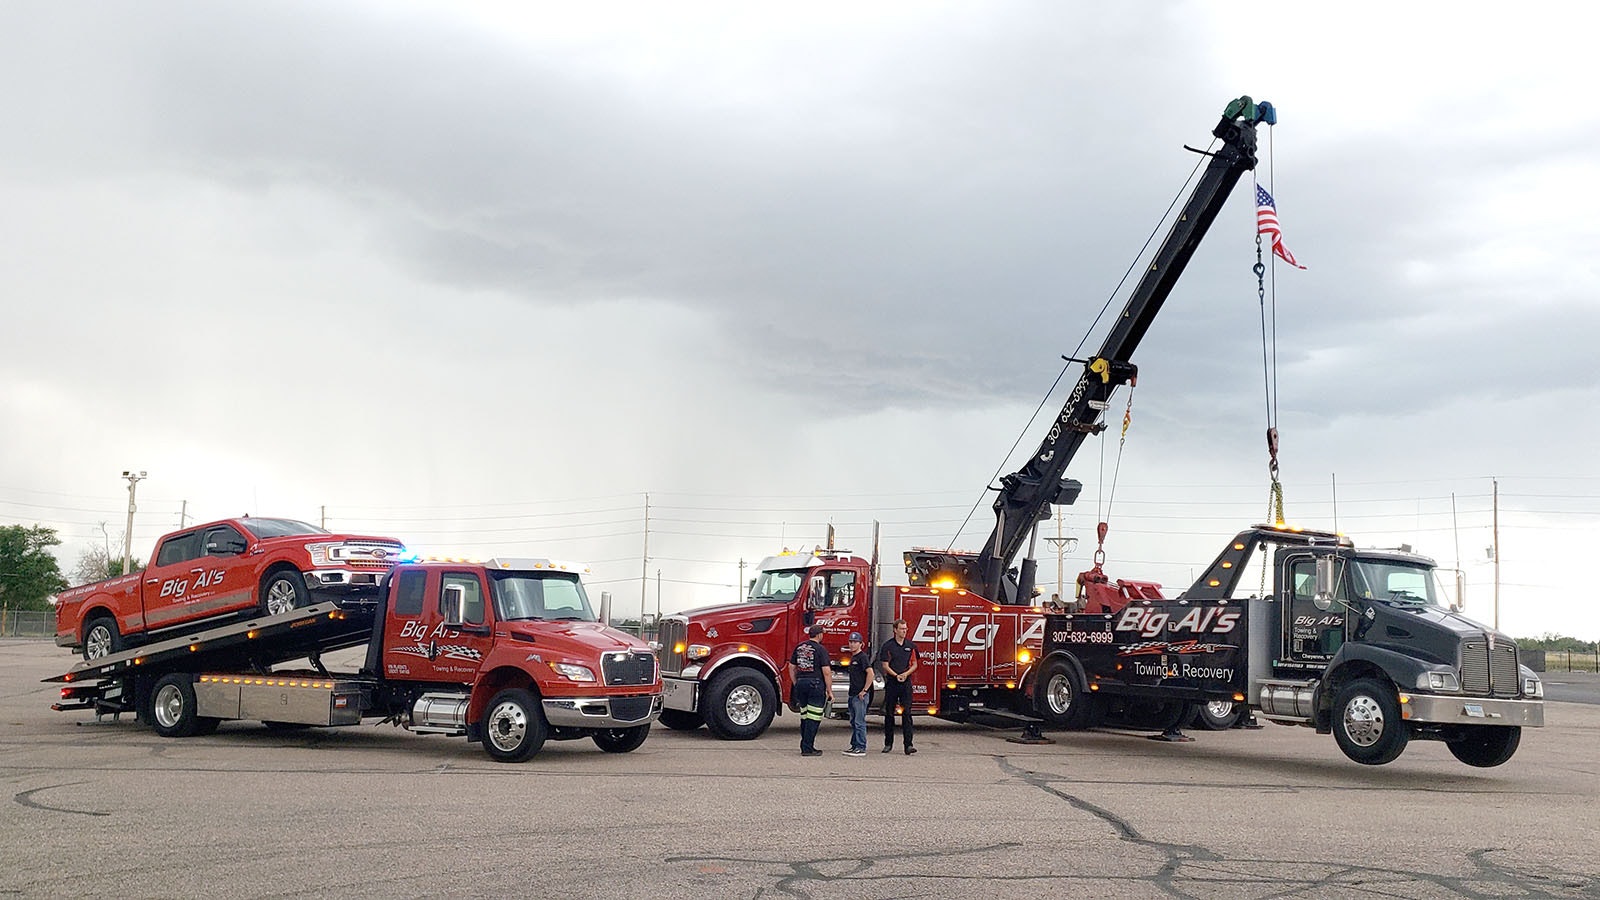 Classic cars isn't all that turn the cranks for Wyoming car enthusiasts. Big Als towing brought these sweet rigs to show at Cars, Cigars and Guitars.